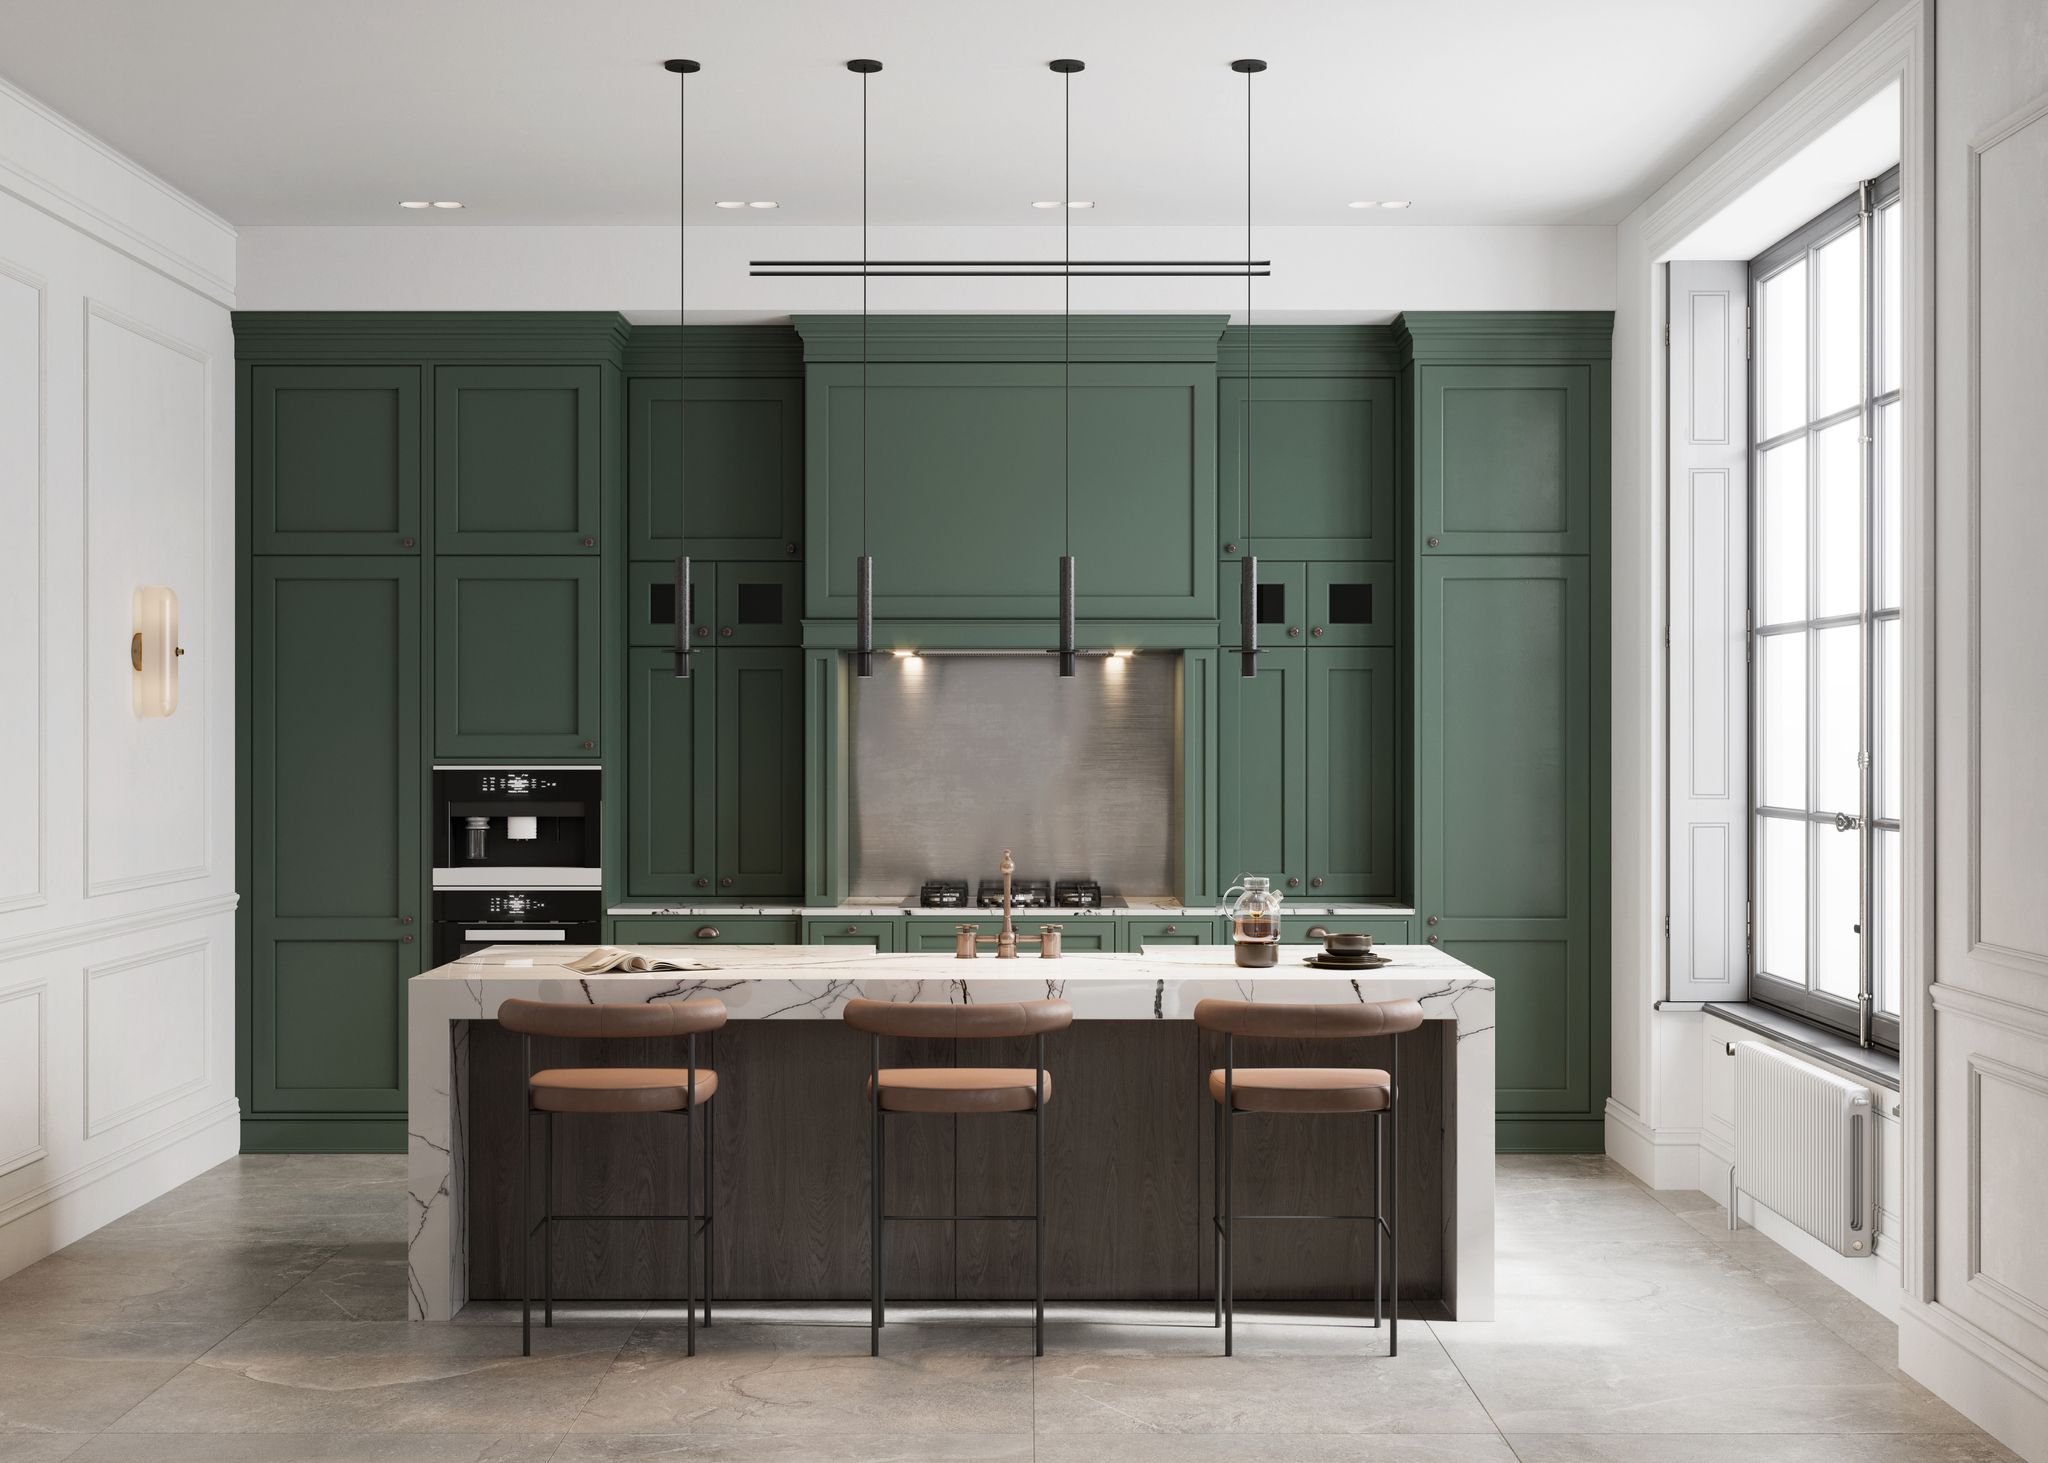 https://hips.hearstapps.com/hmg-prod/images/modern-kitchen-interior-with-green-wall-royalty-free-image-1673459791.jpg